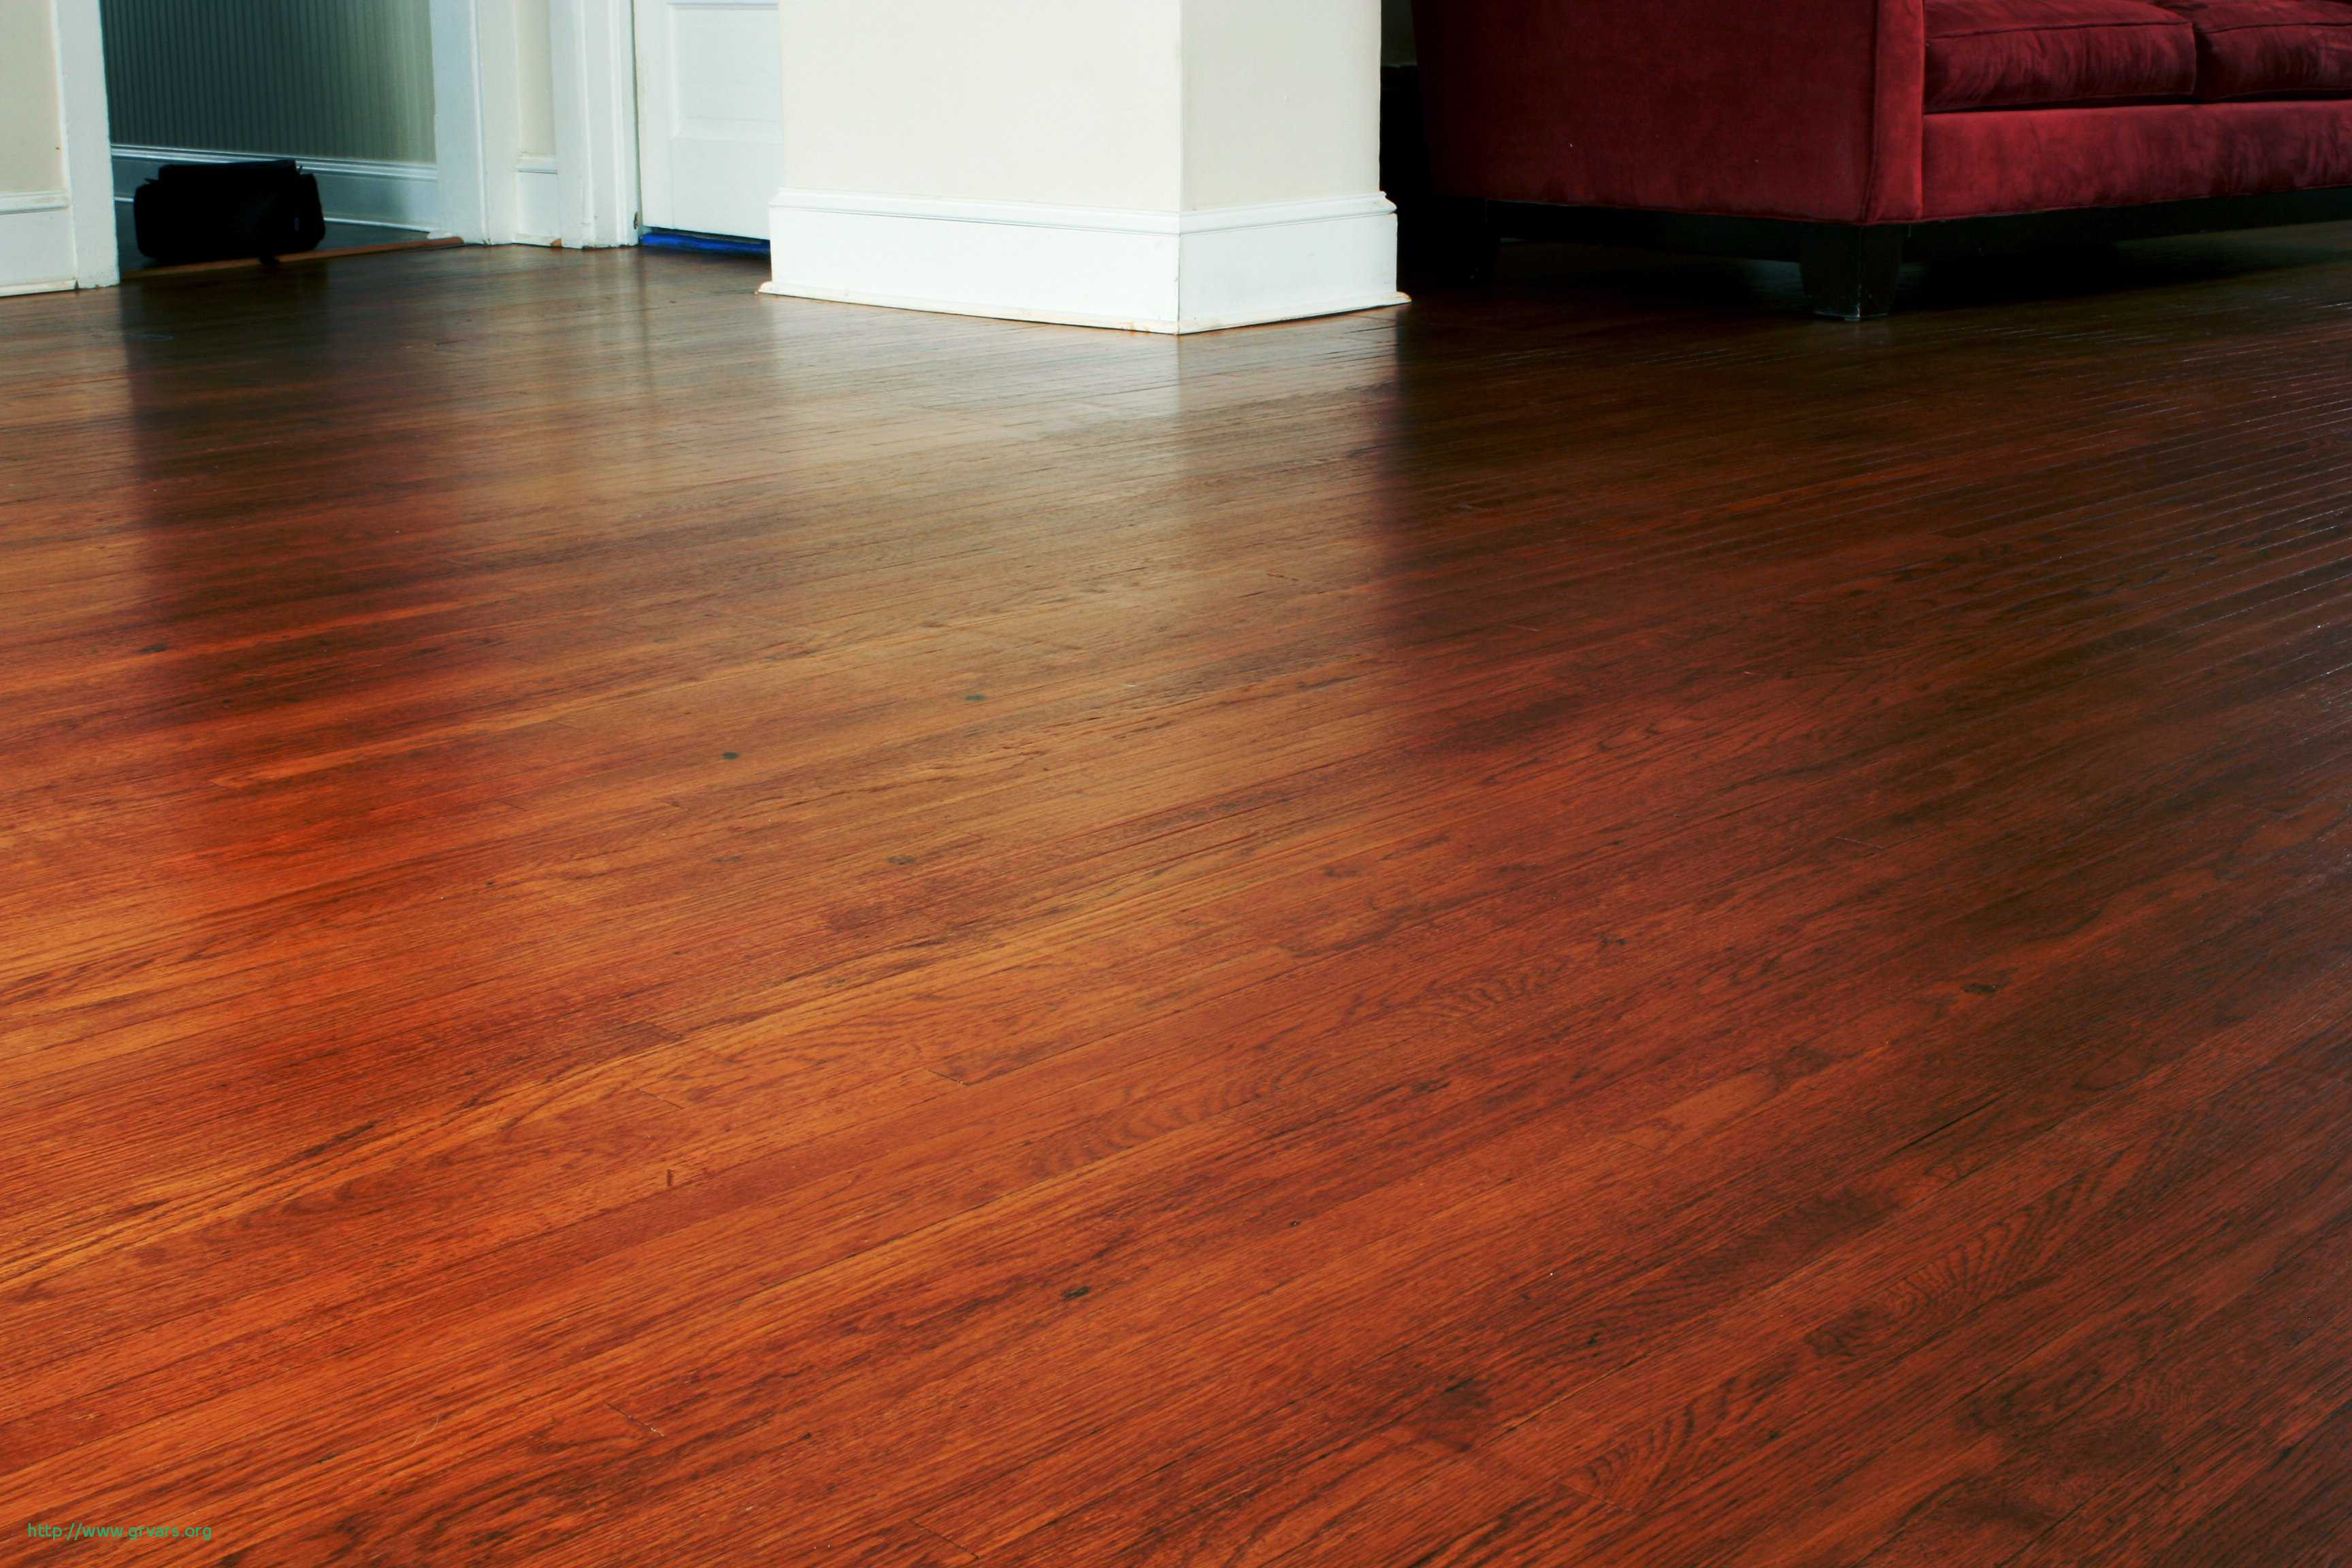 16 Awesome Laminate Flooring Vs Hardwood Resale Value 2024 free download laminate flooring vs hardwood resale value of 17 frais cost to replace flooring in home ideas blog for cost to replace flooring in home charmant how to diagnose and repair sloping floors hom